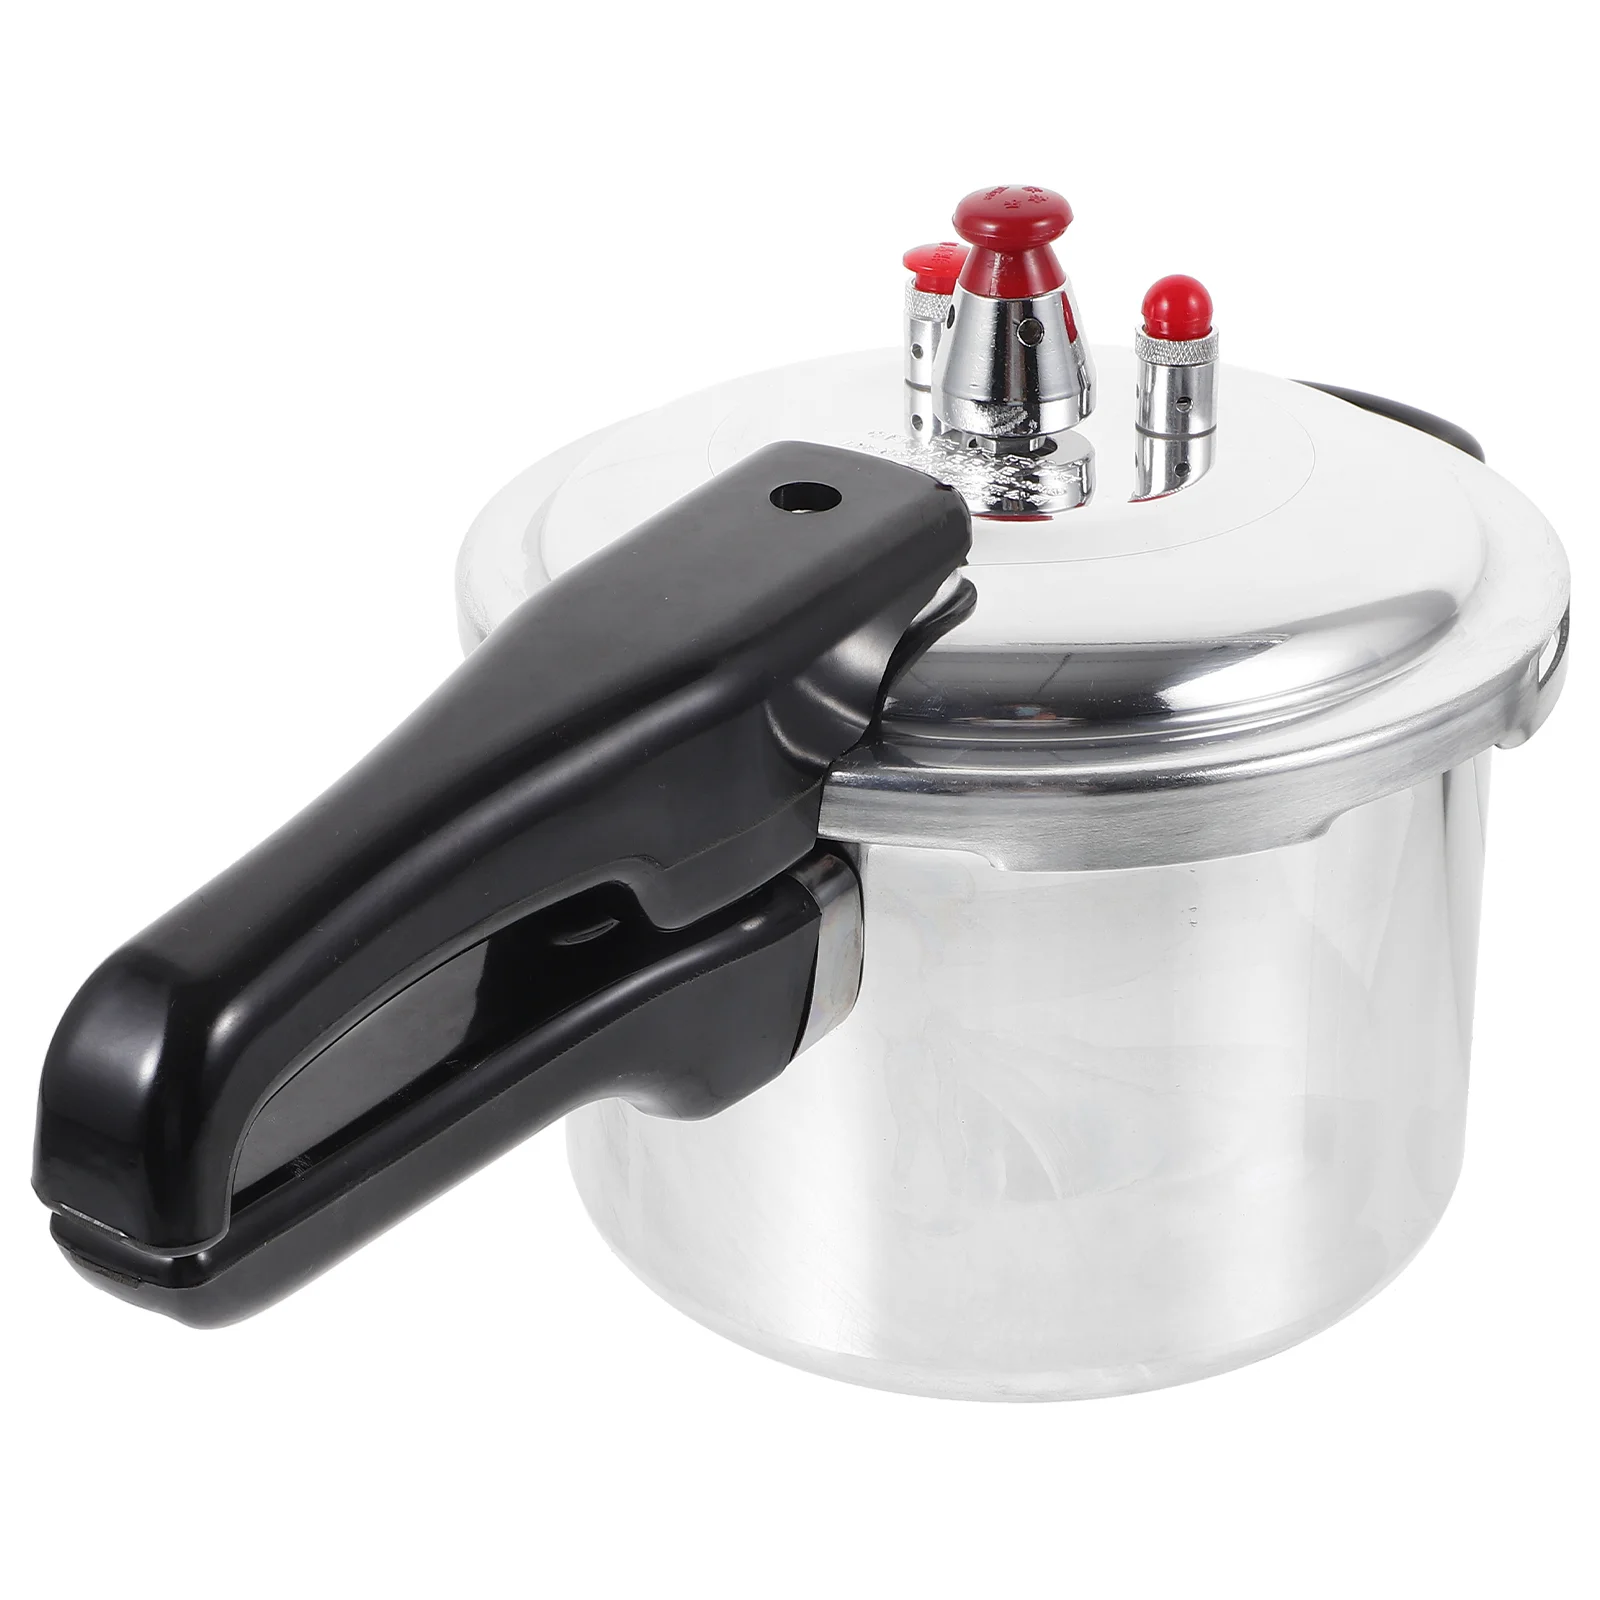 

Pressure Cooker Pot for Cooking Gas Stove Induction Cookers Small Stovetop Aluminum Alloy